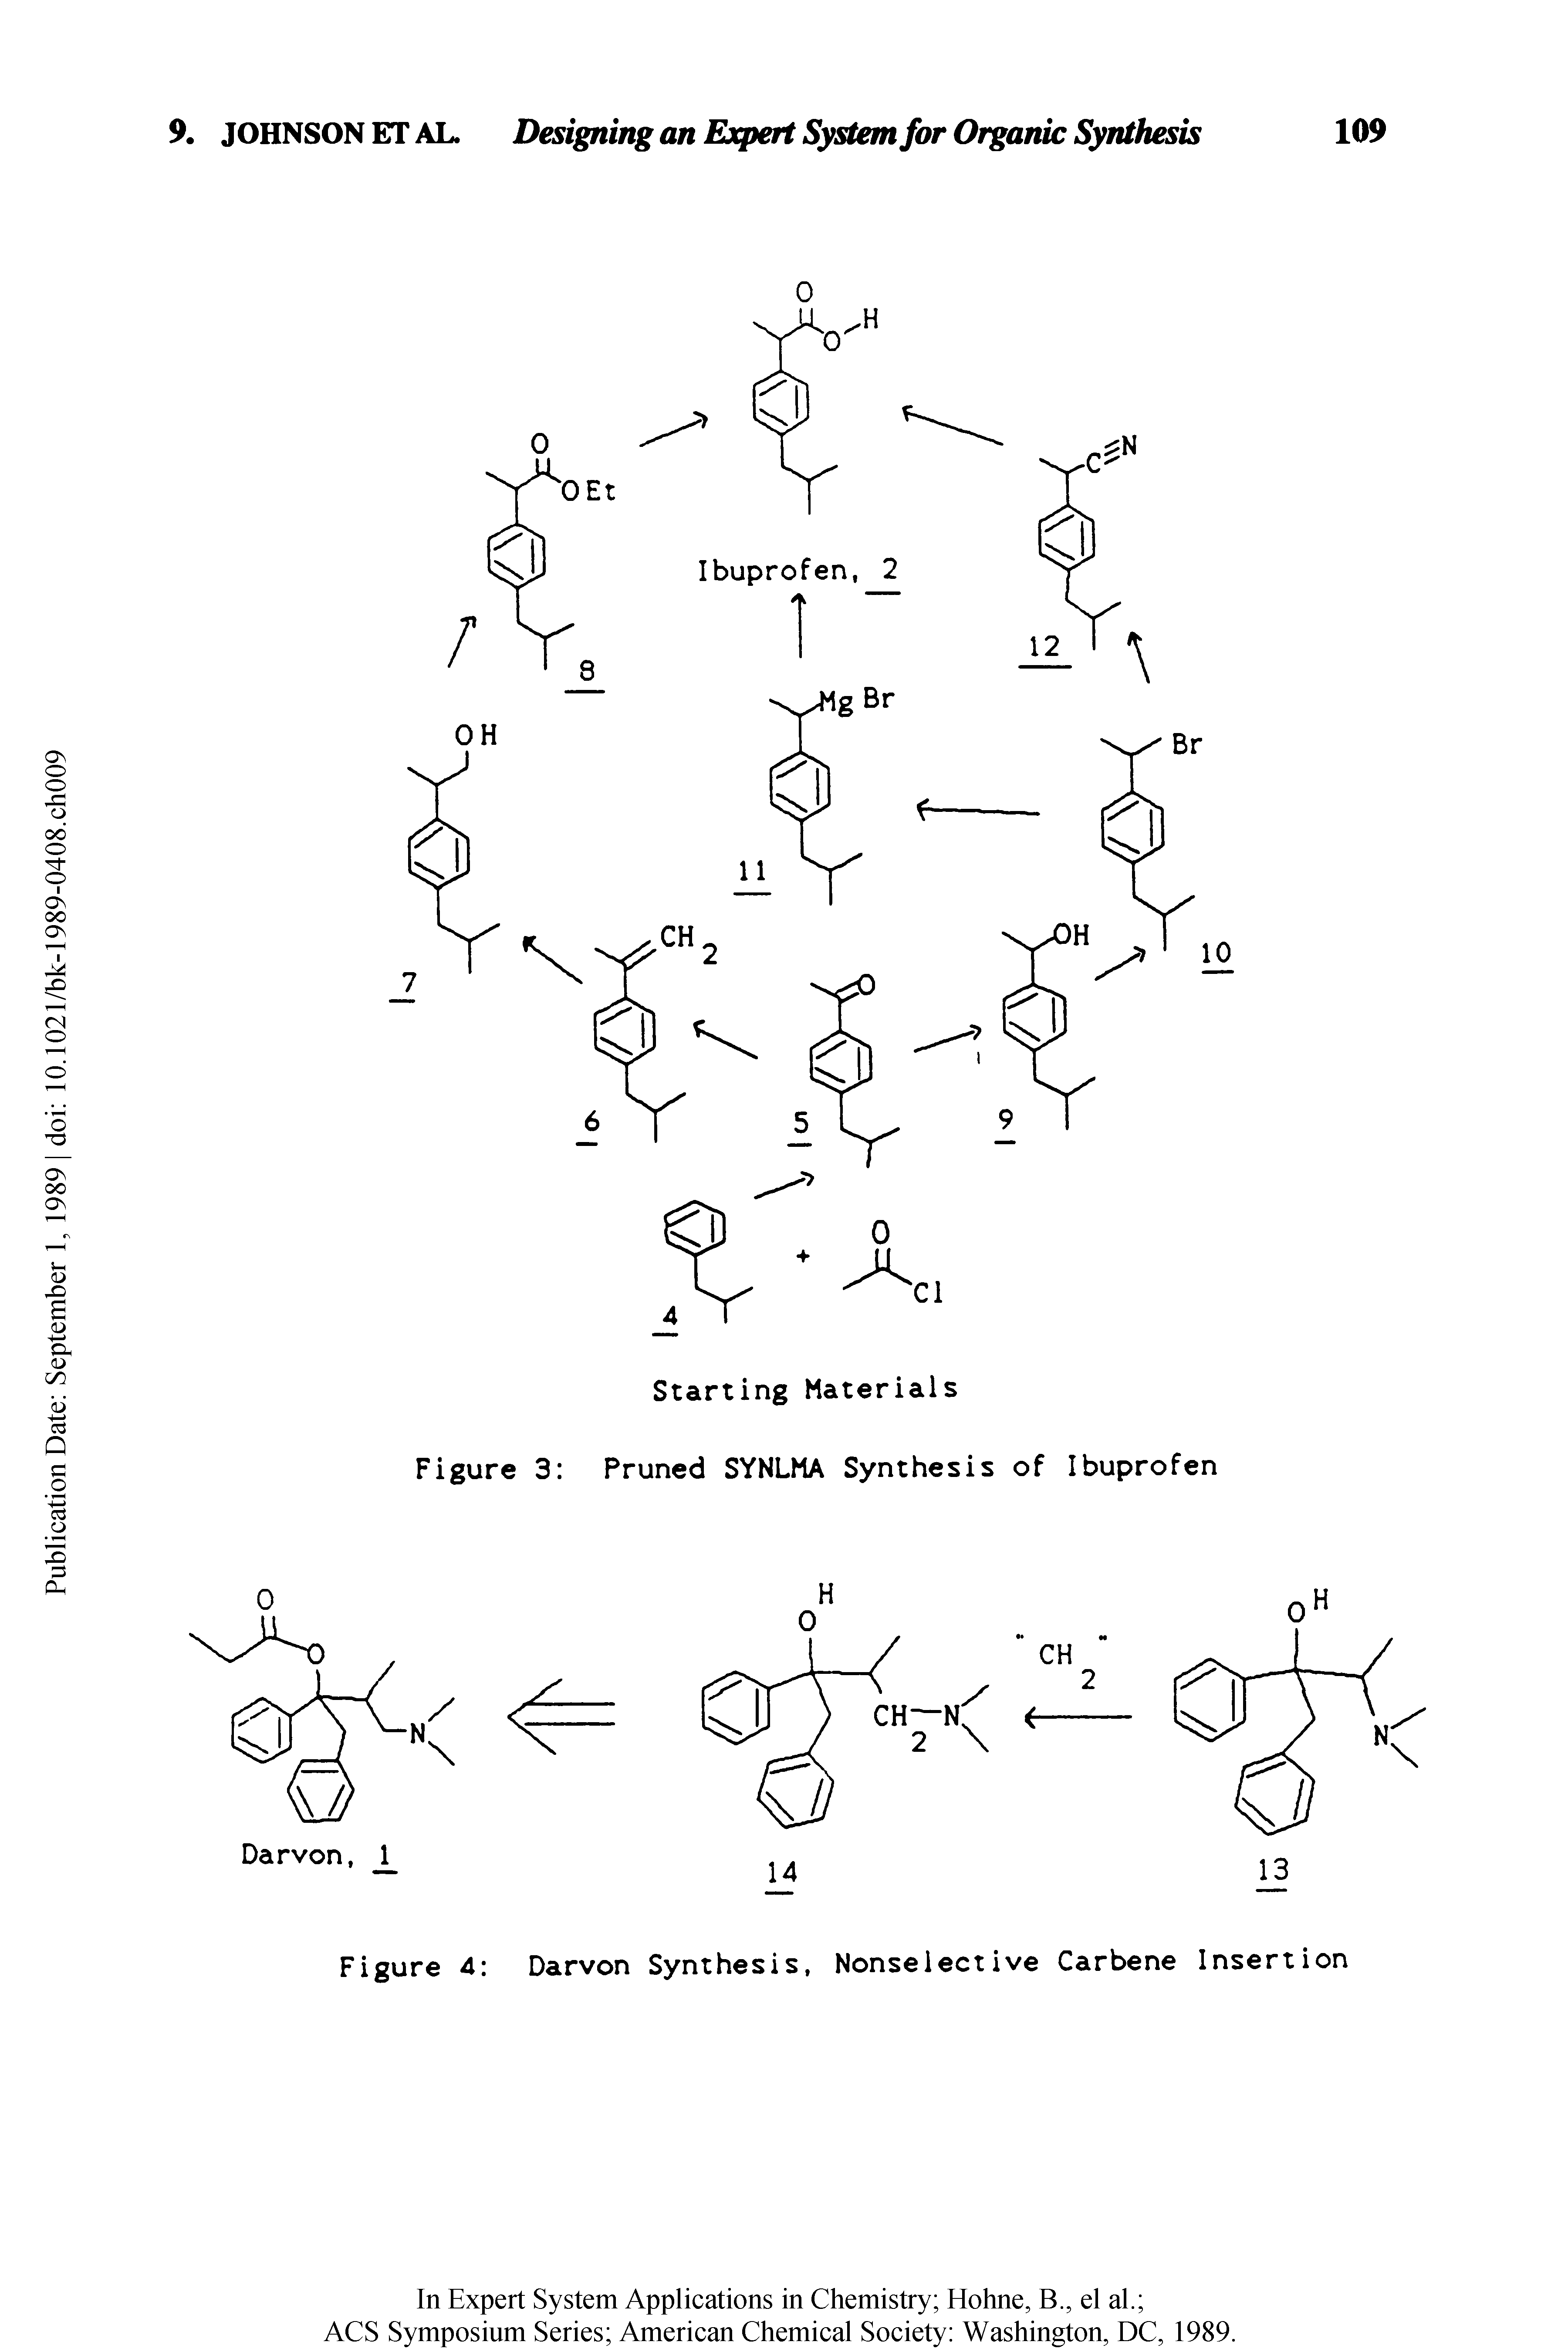 Figure 4 Darvon Synthesis, Nonselective Carbene Insertion...